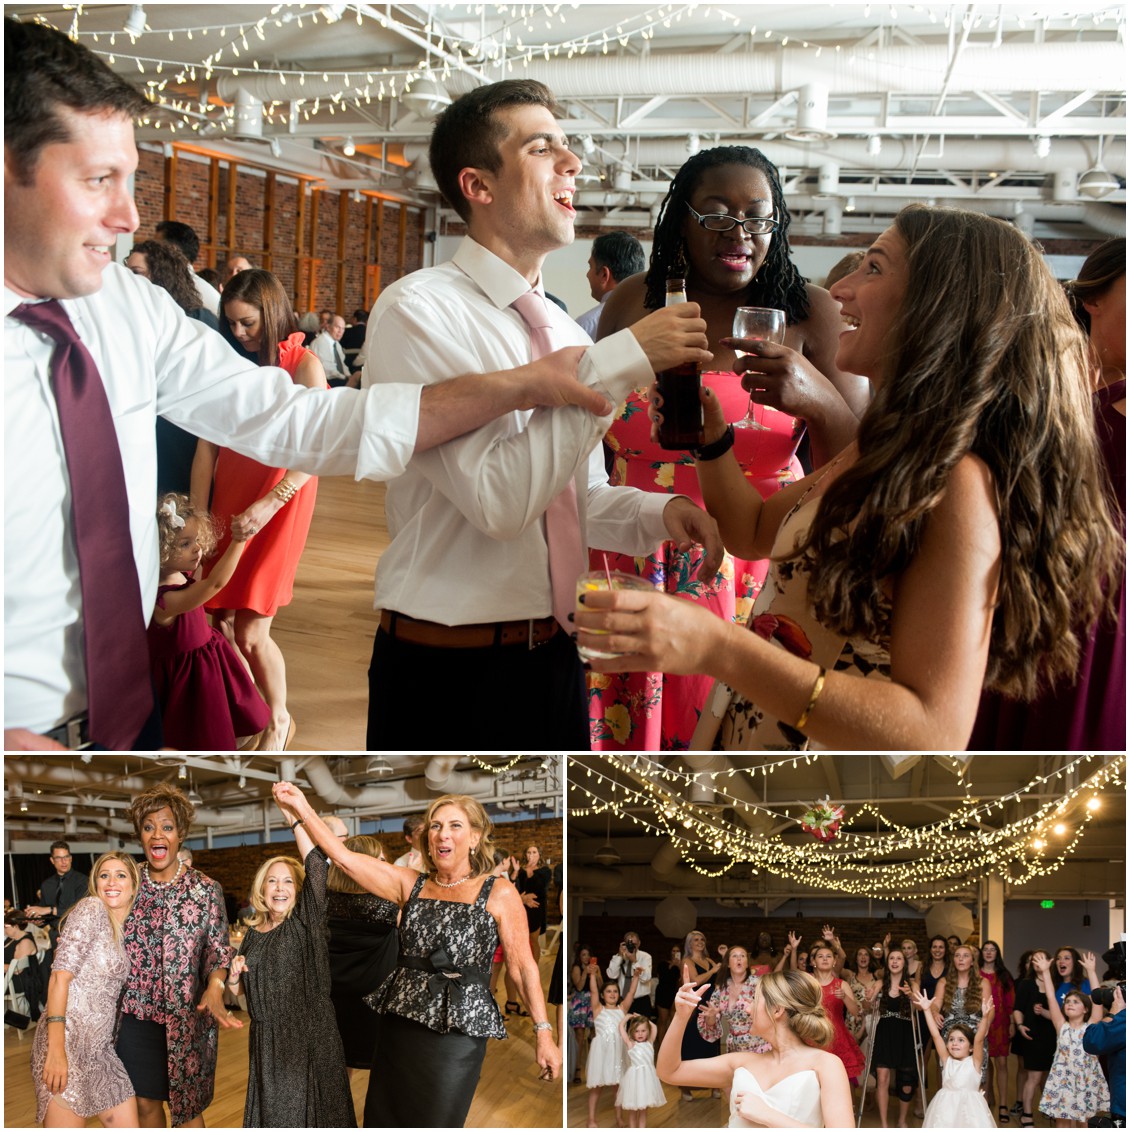 Baltimore Wedding reception at American Visionary Art Museum by Melissa Grimes-Guy Photography